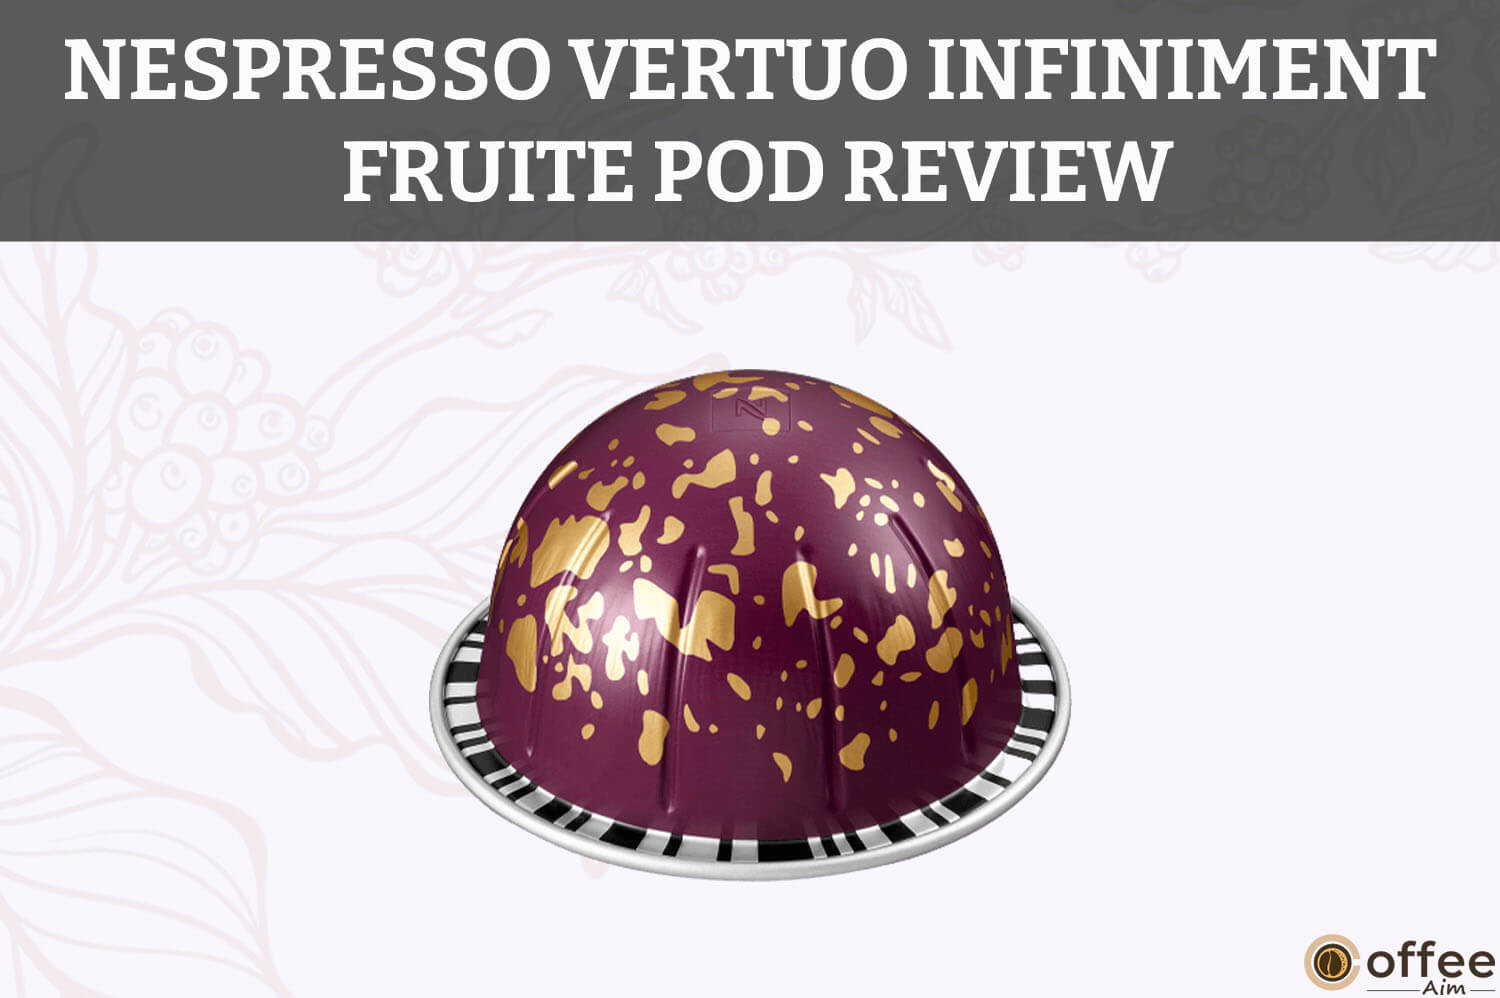 Featured image for the article "Nespresso Vertuo Infiniment Fruite Pod Review"